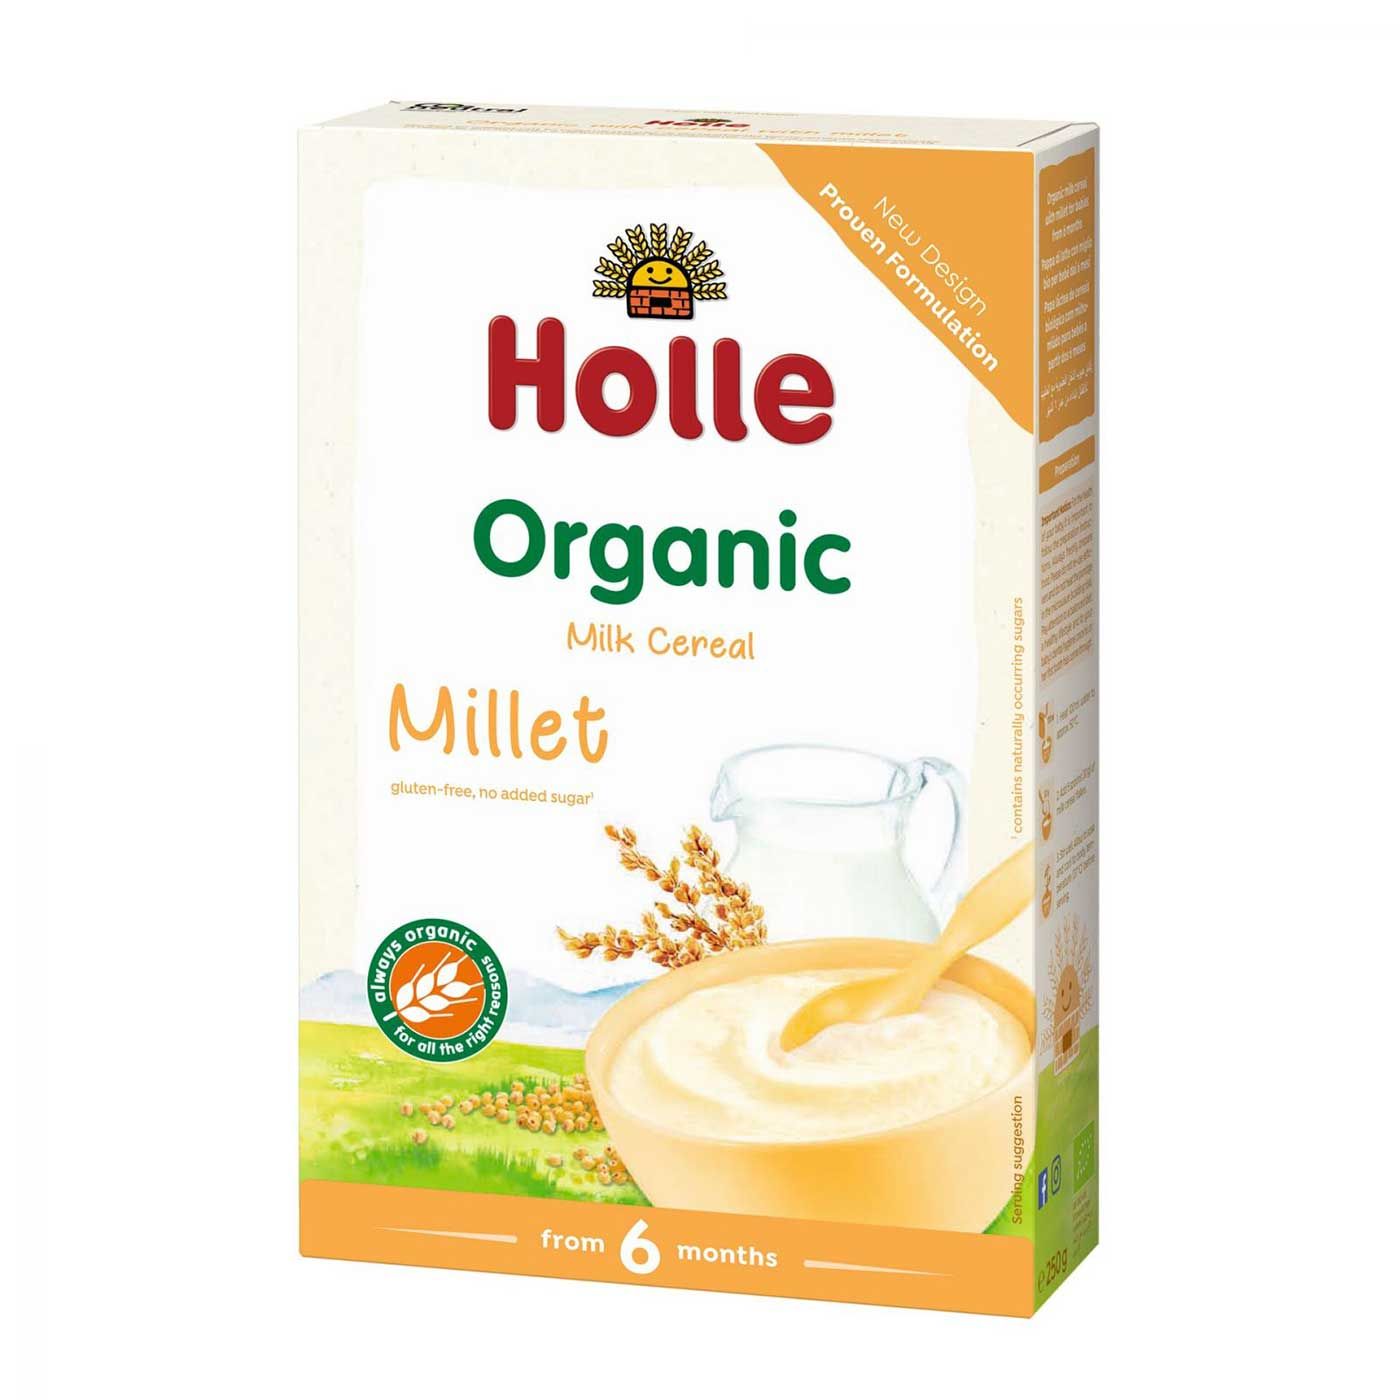 Holle Organic Milk Cereal with Millet 250g - 3